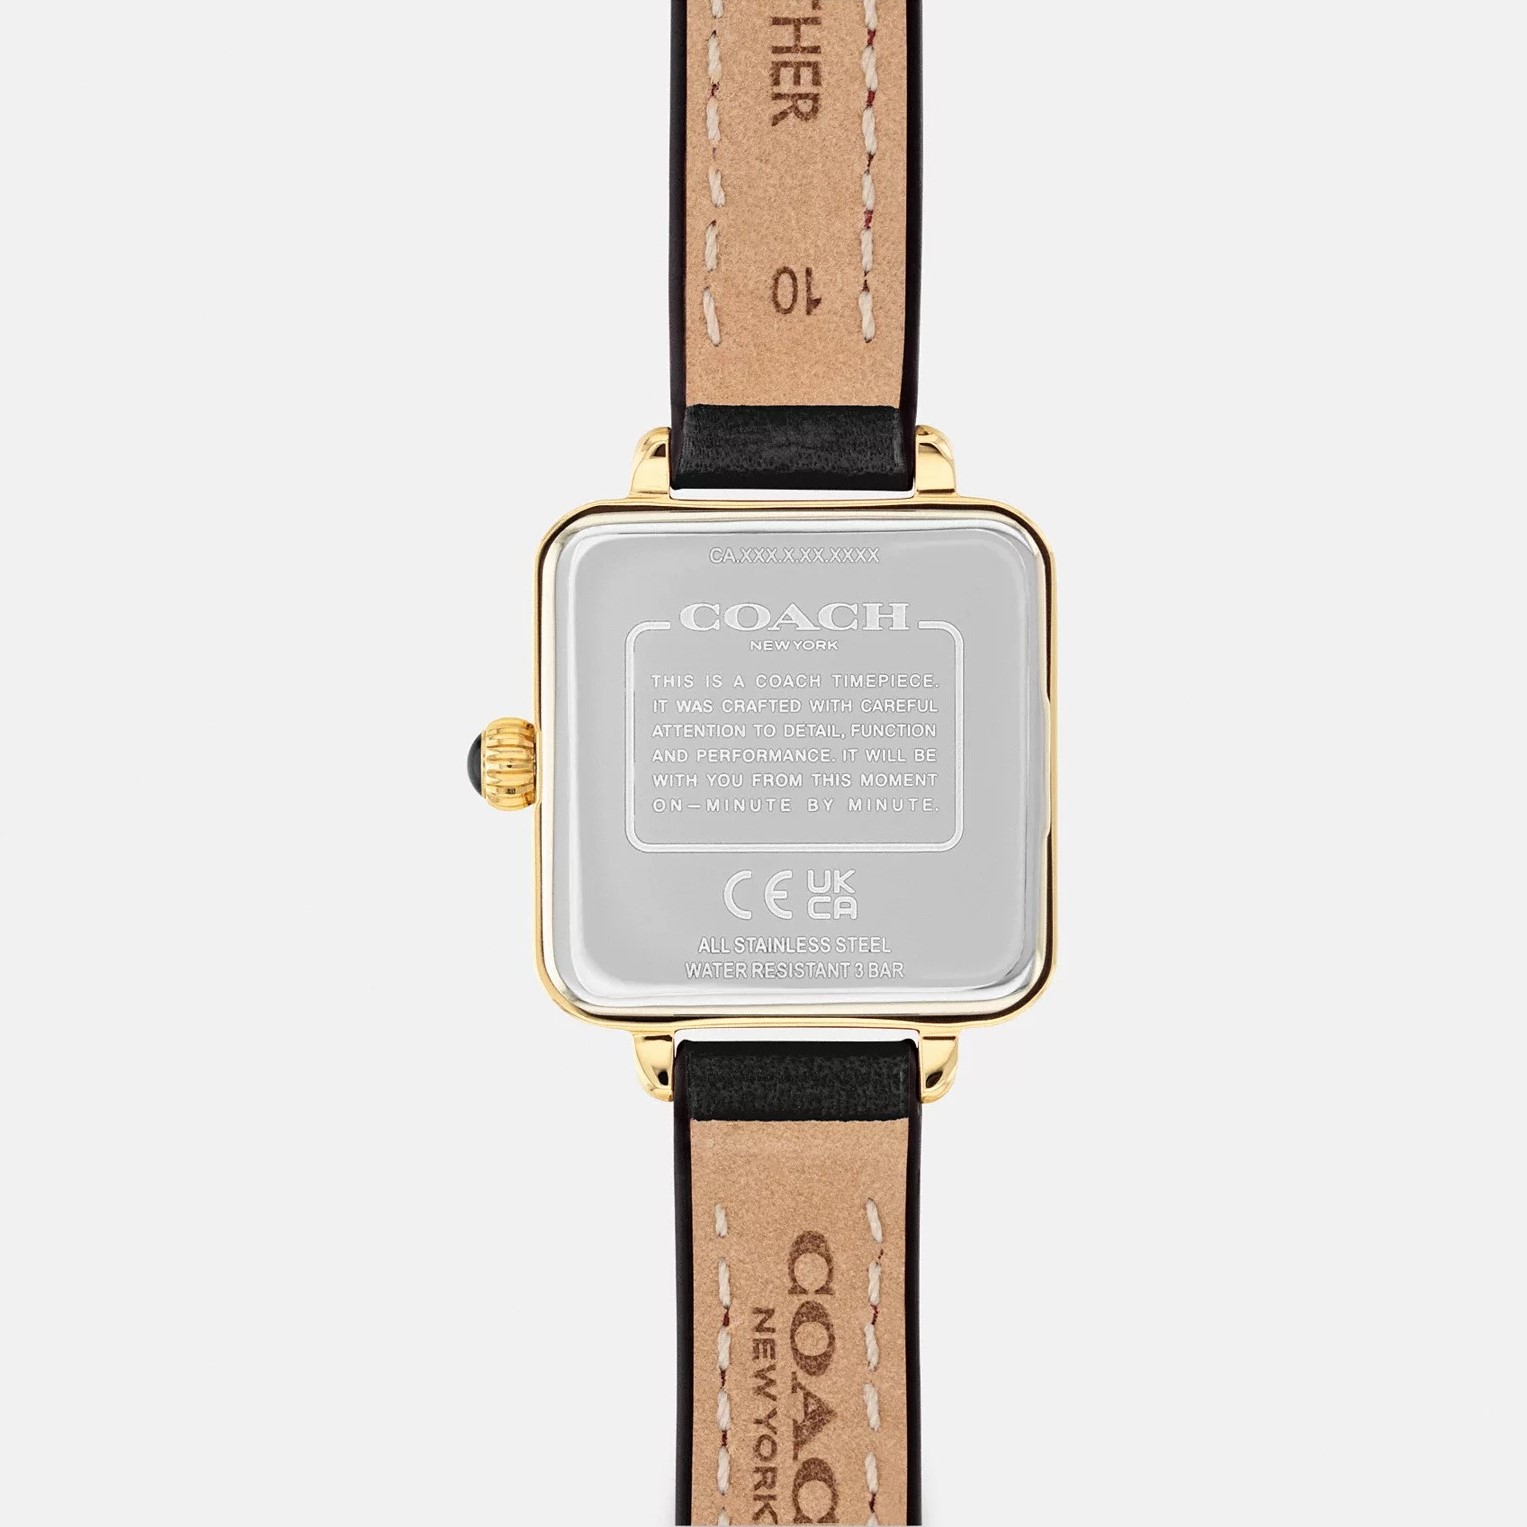 ĐỒNG HỒ NỮ DÂY DA ĐEN COACH CASS SIGNATURE HORSE AND CARRIAGE ION-PLATED GOLDTONE STEEL AND BLACK LEATHER STRAP WATCH 14504225 6